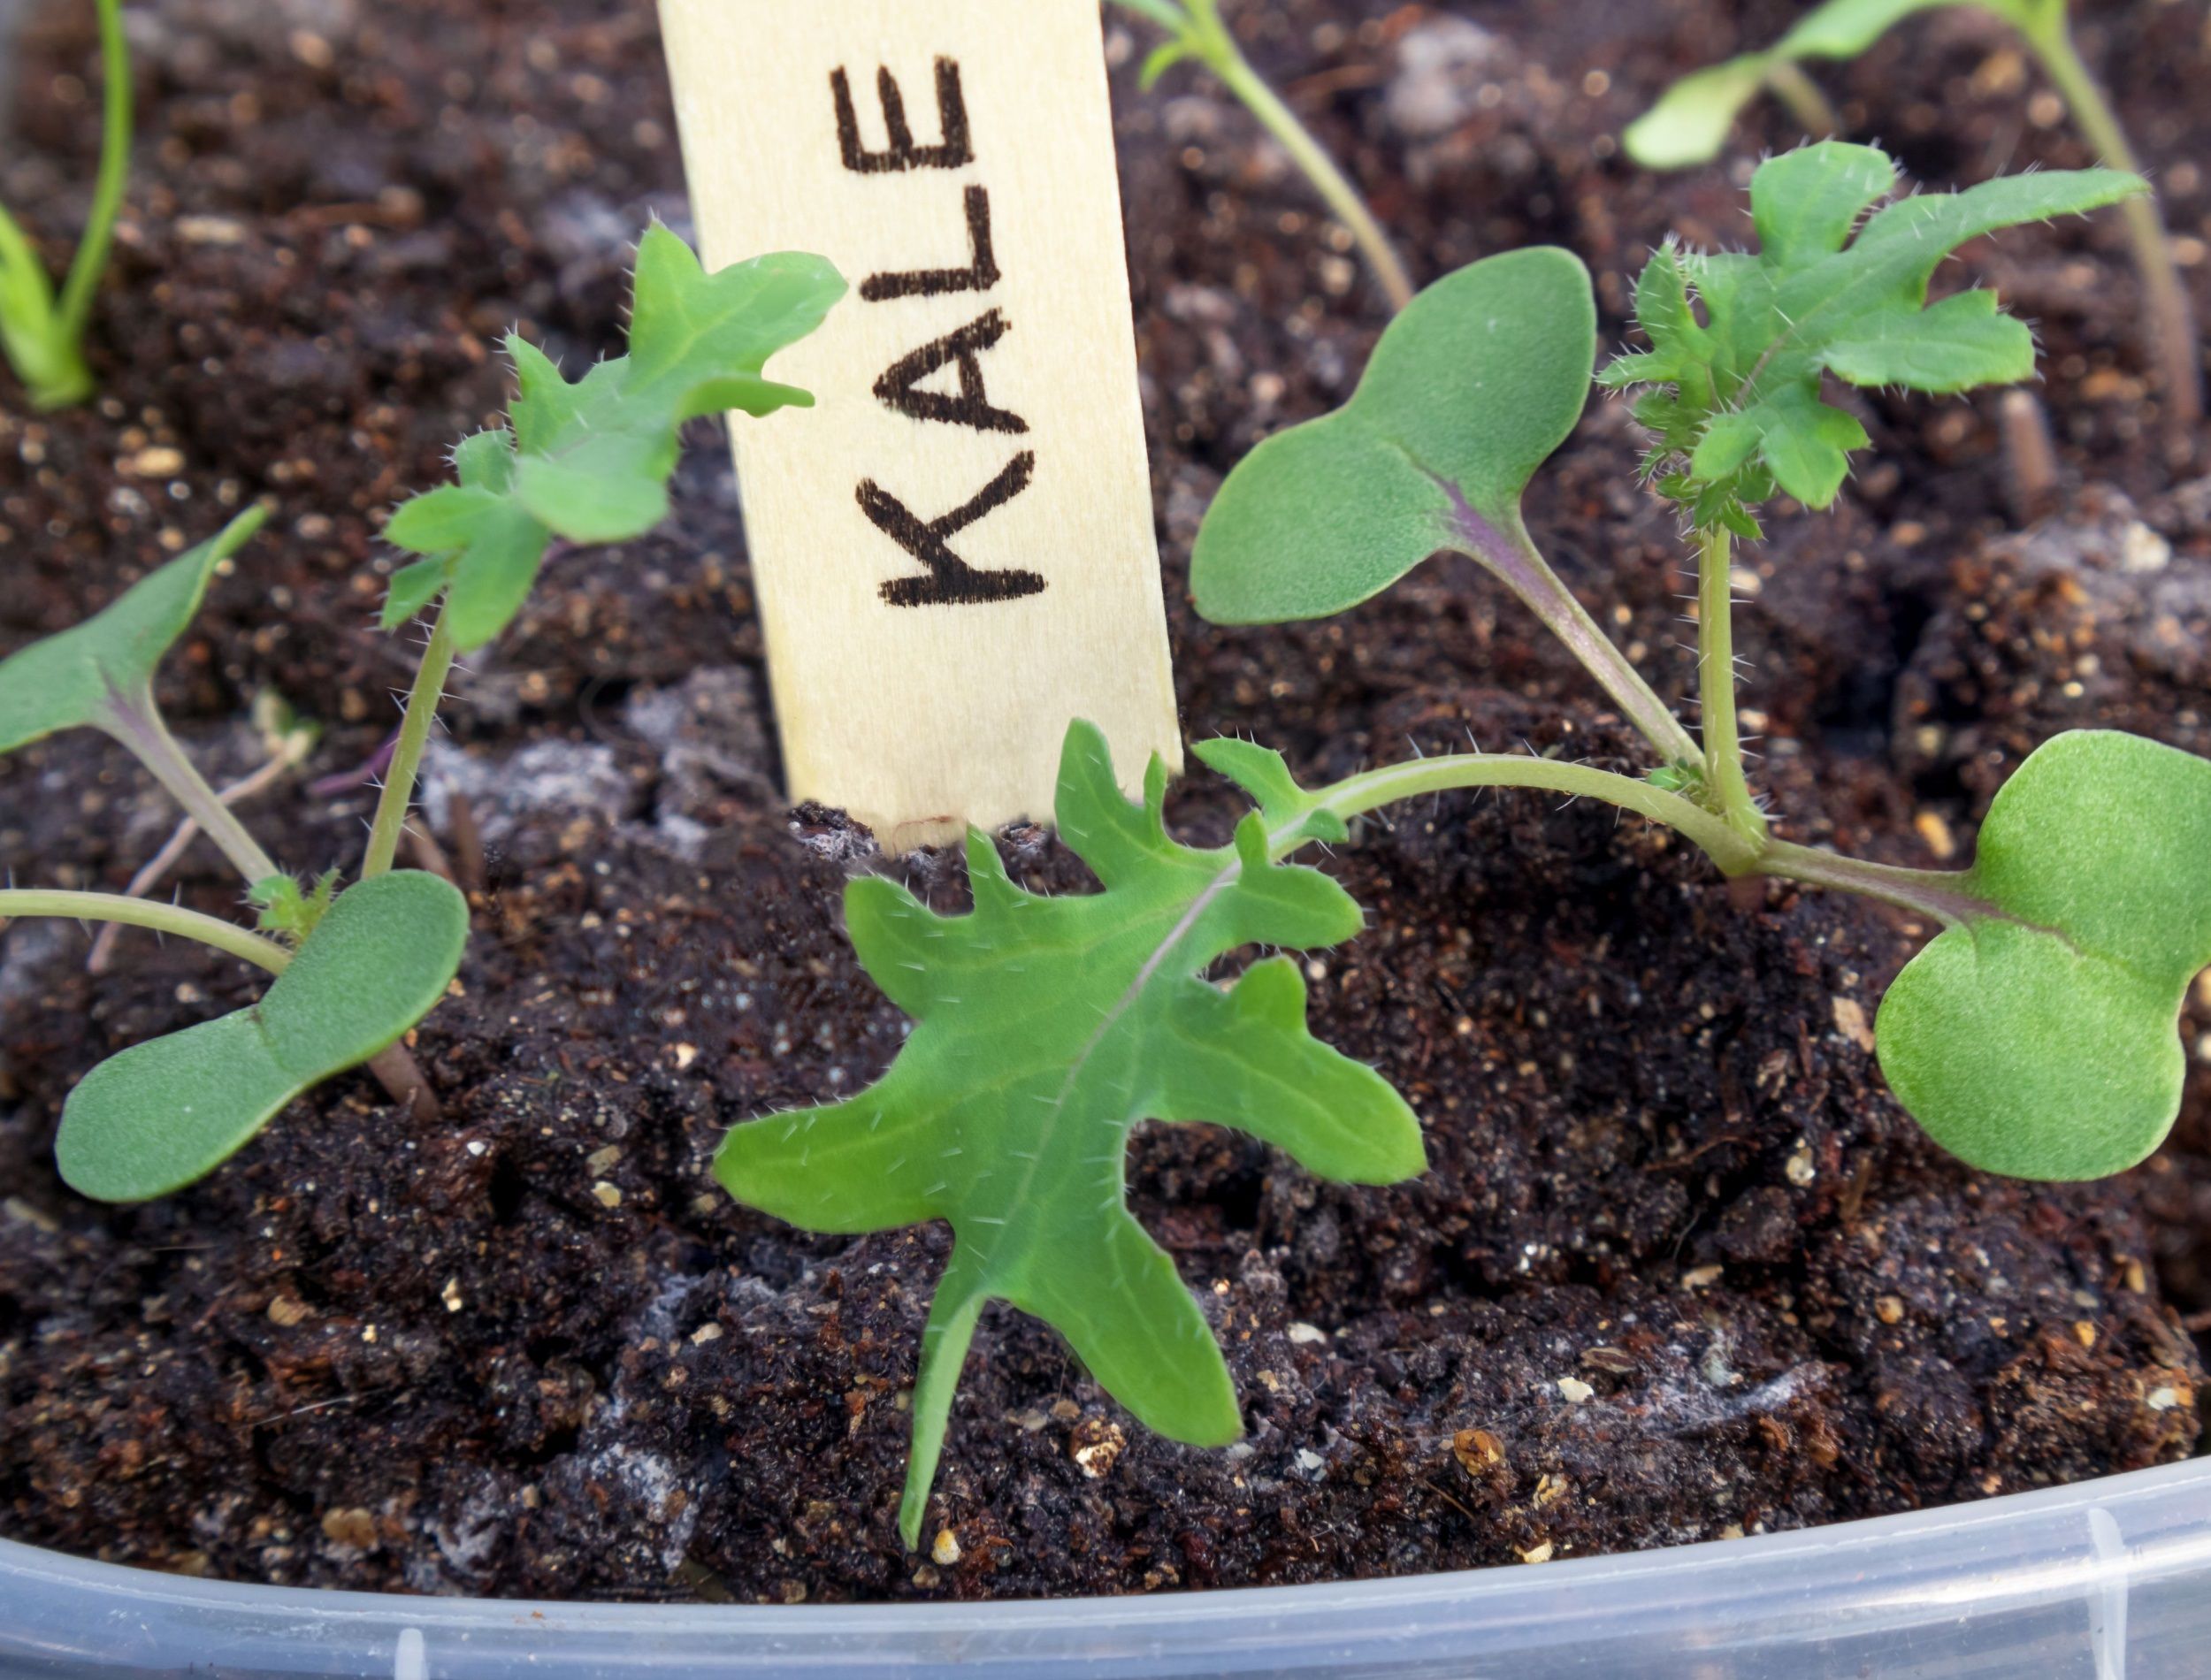 Kale seedlings in container with wooden name tag. Close up. Brassica oleracea or cruciferous vegetables. Red Russian Kale planted indoors. Soon ready to be transplanted. True leaves visible.